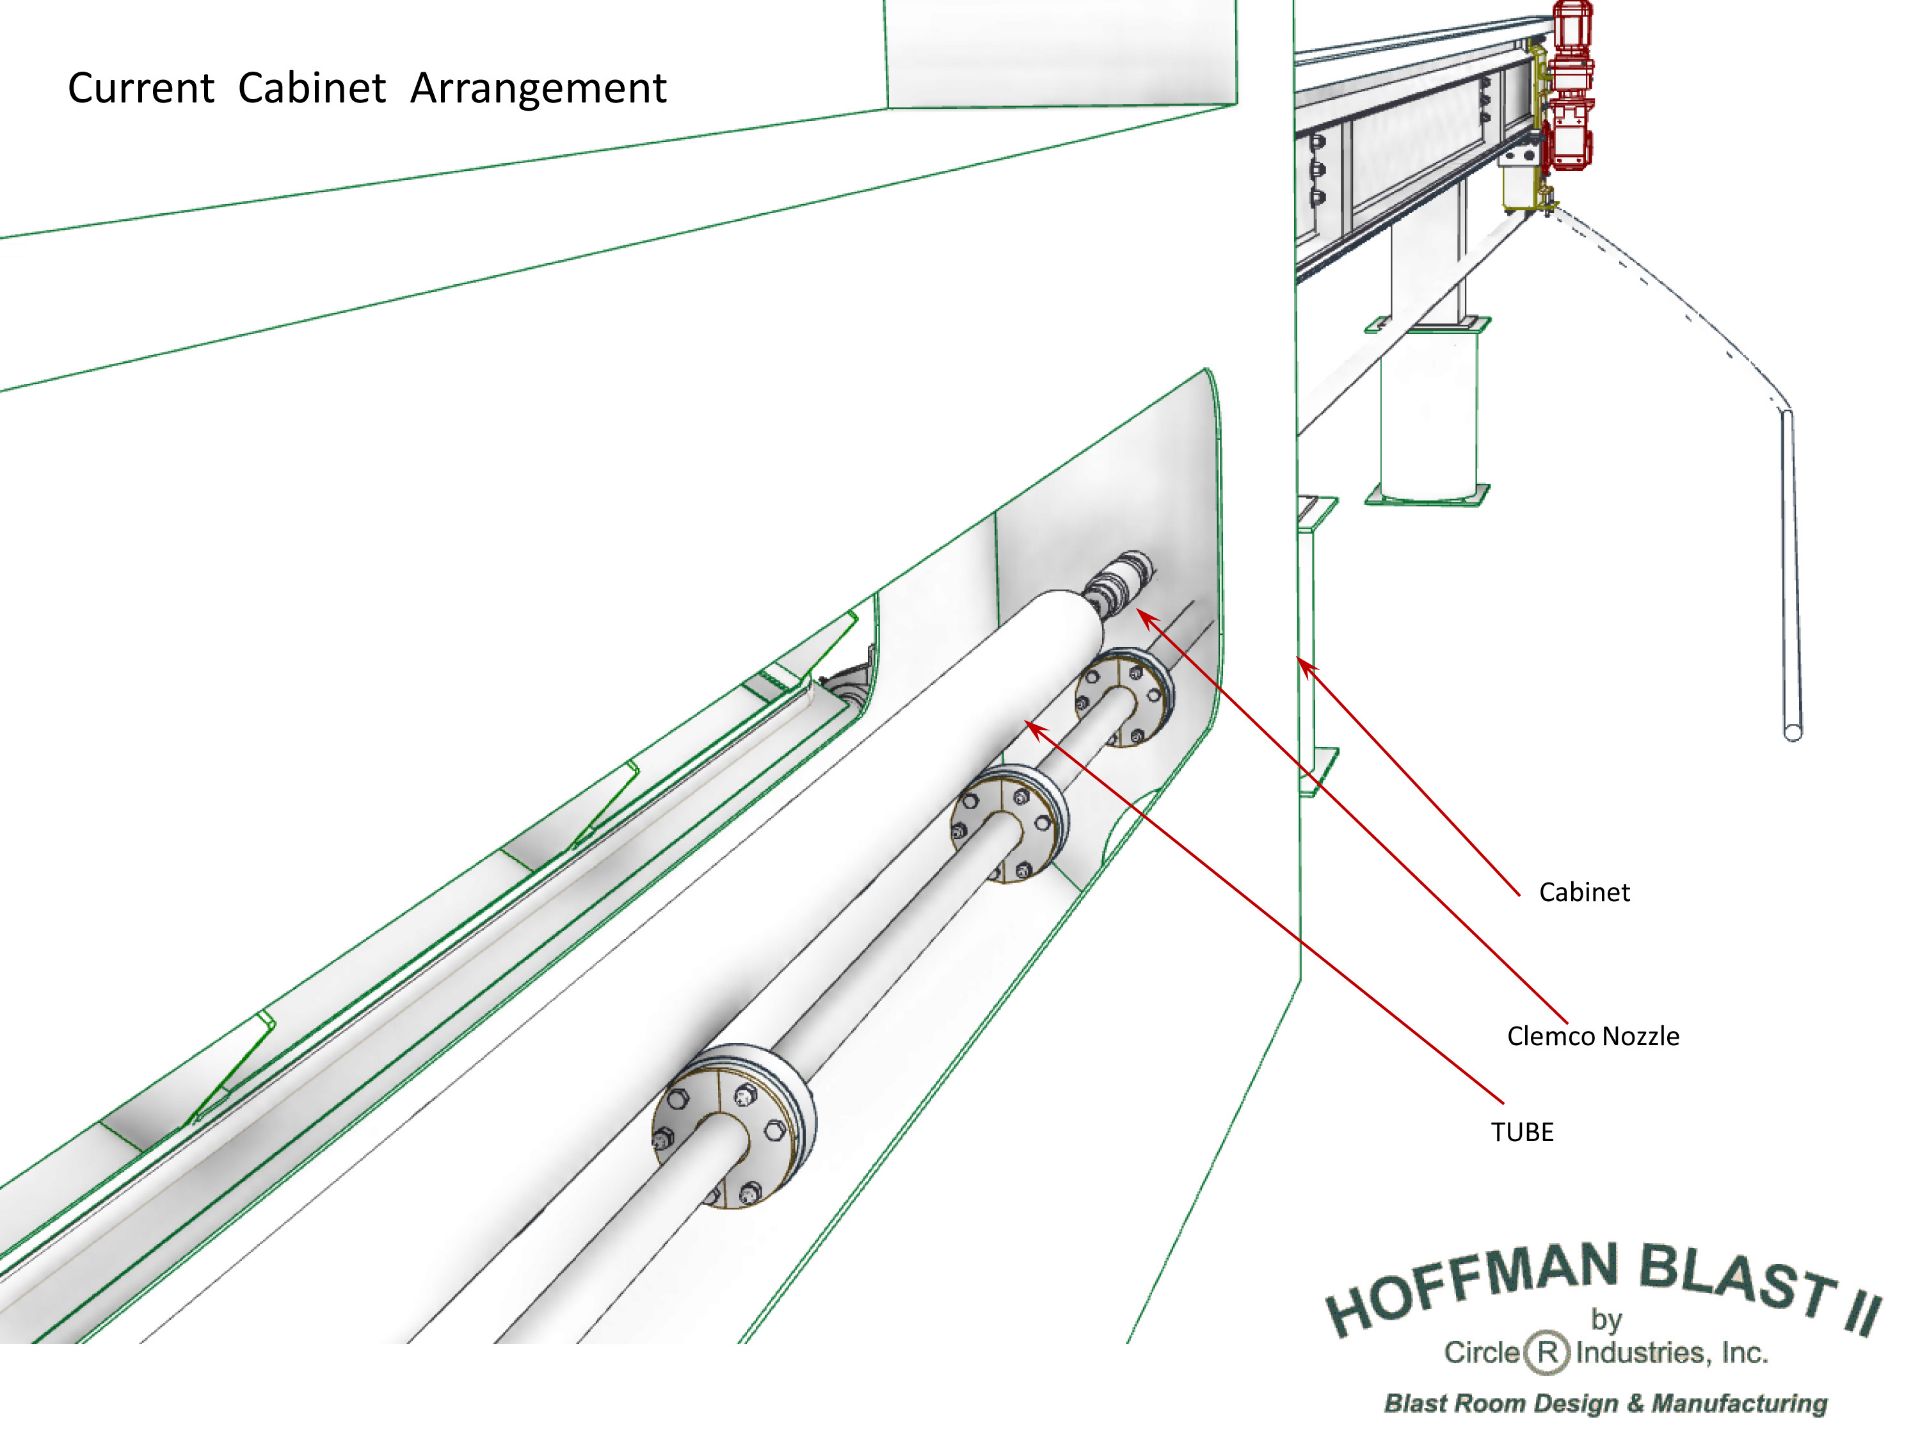 Complete Hoffman Blast II Line semi-automated system Prececo line (contains lots 160, 161, 162) - Image 13 of 14